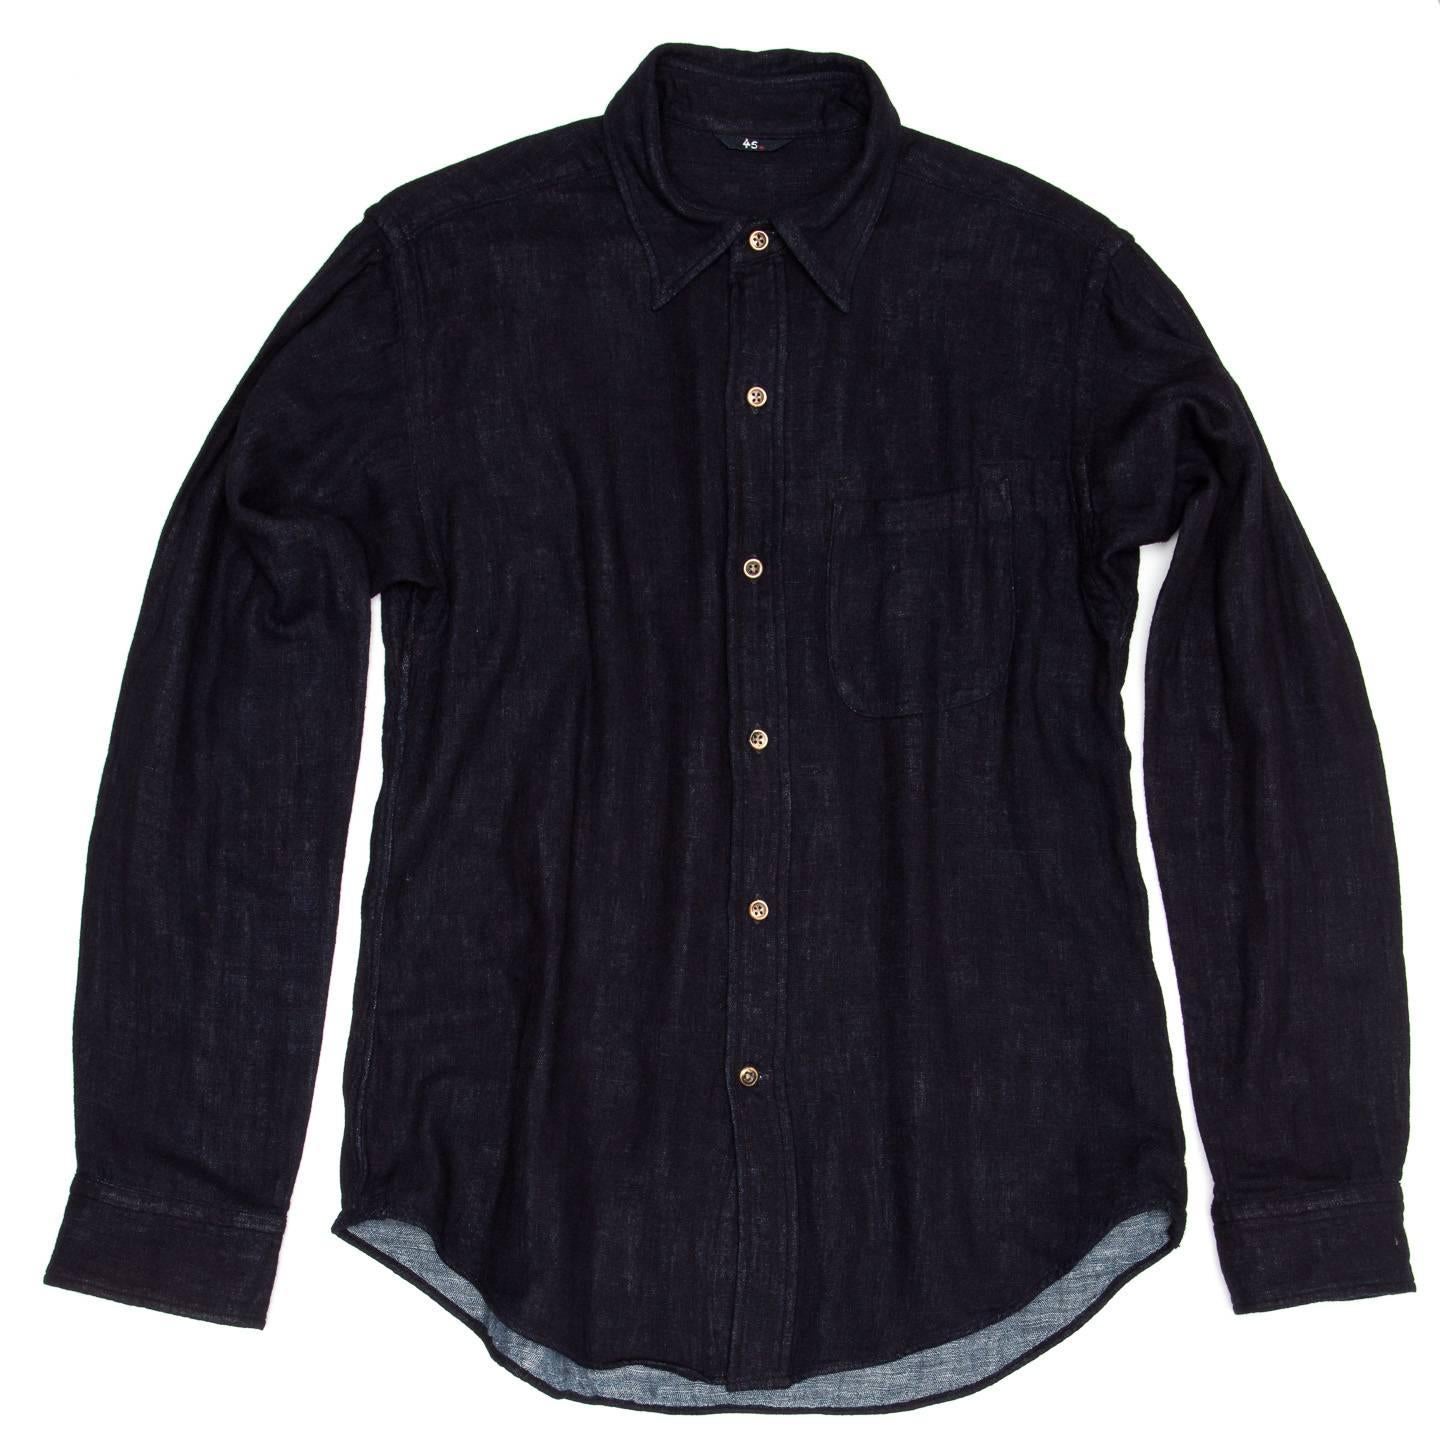 Dark indigo blue cotton fitted shirt with small and soft spread collar and caramel brown buttons. The front is enriched by a rounded patch pocket while a box pleat embellishes the back. Made for Man. Made in Japan.

Size  4

Condition  Excellent: